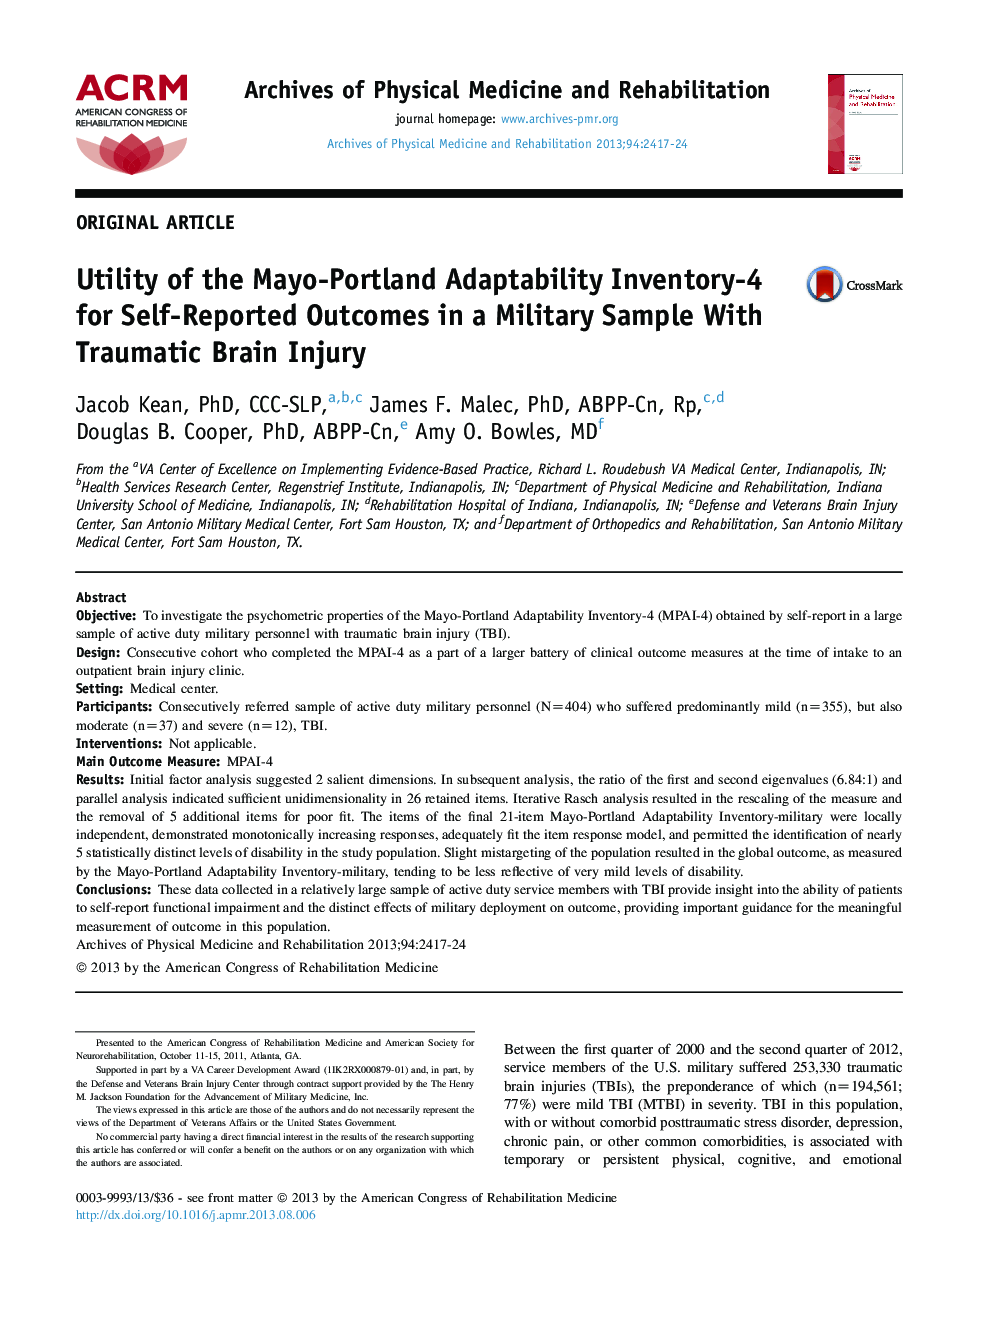 Utility of the Mayo-Portland Adaptability Inventory-4 for Self-Reported Outcomes in a Military Sample With Traumatic Brain Injury 